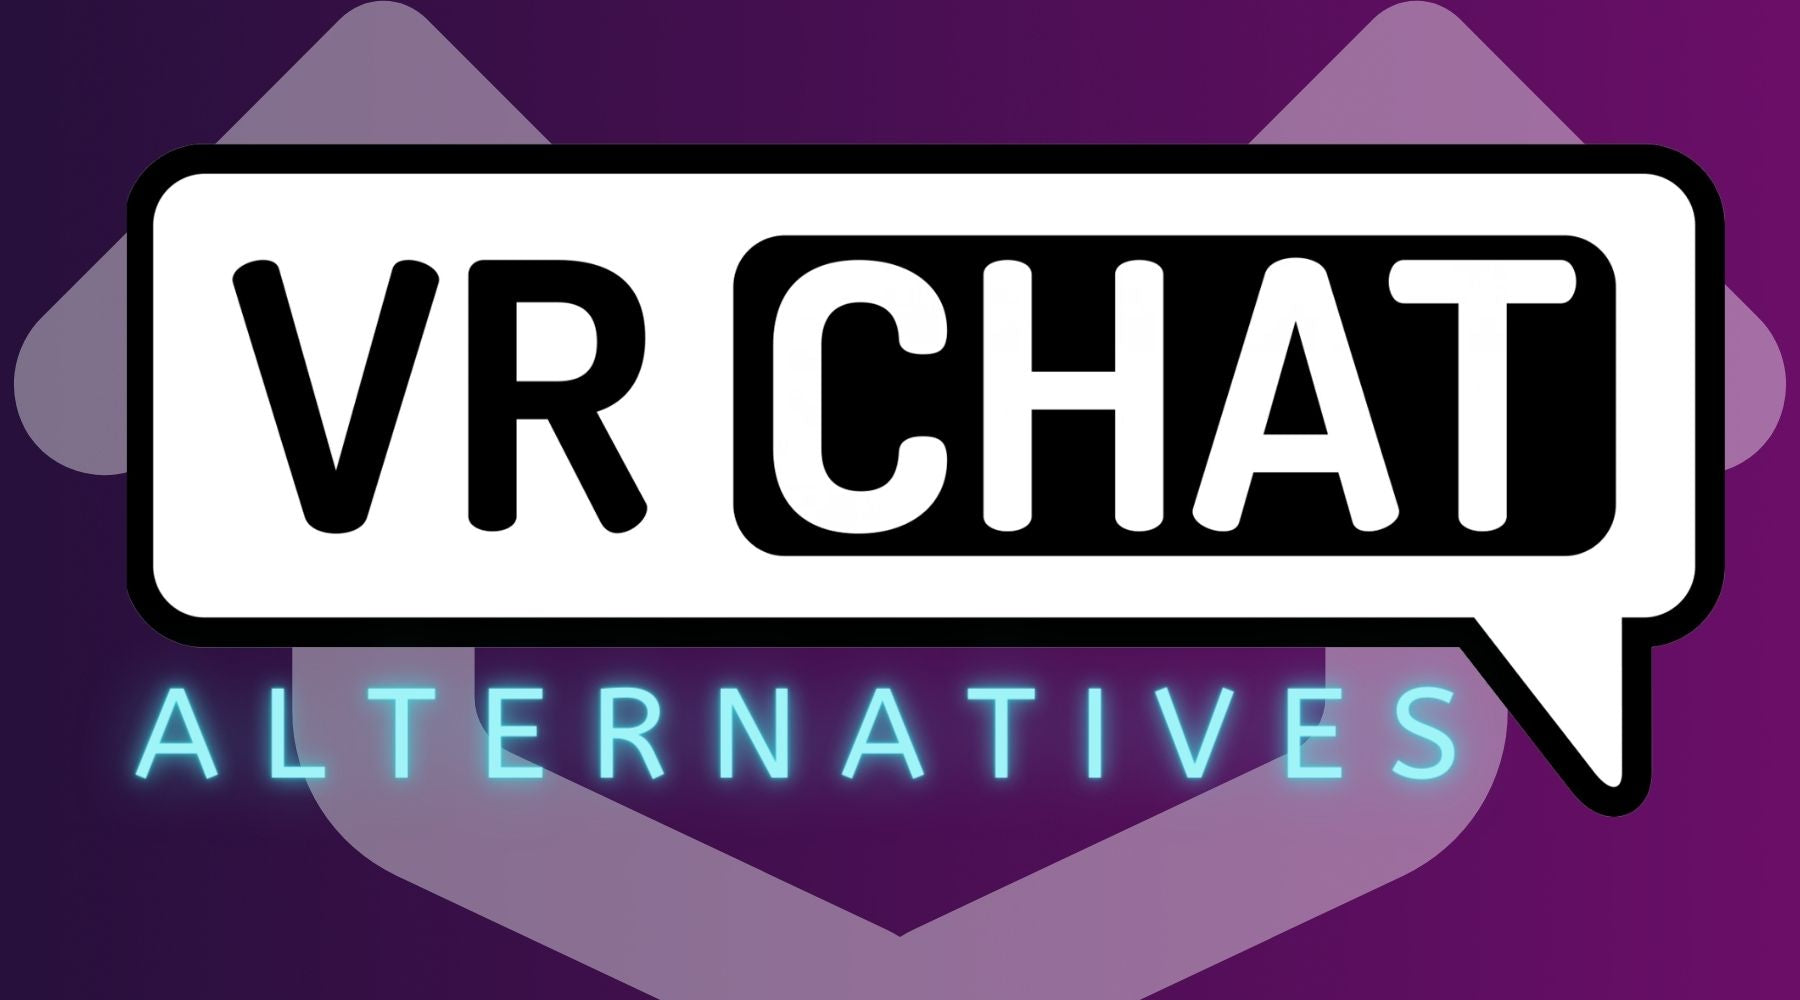 Now you can play VR Chat without any controllers at all